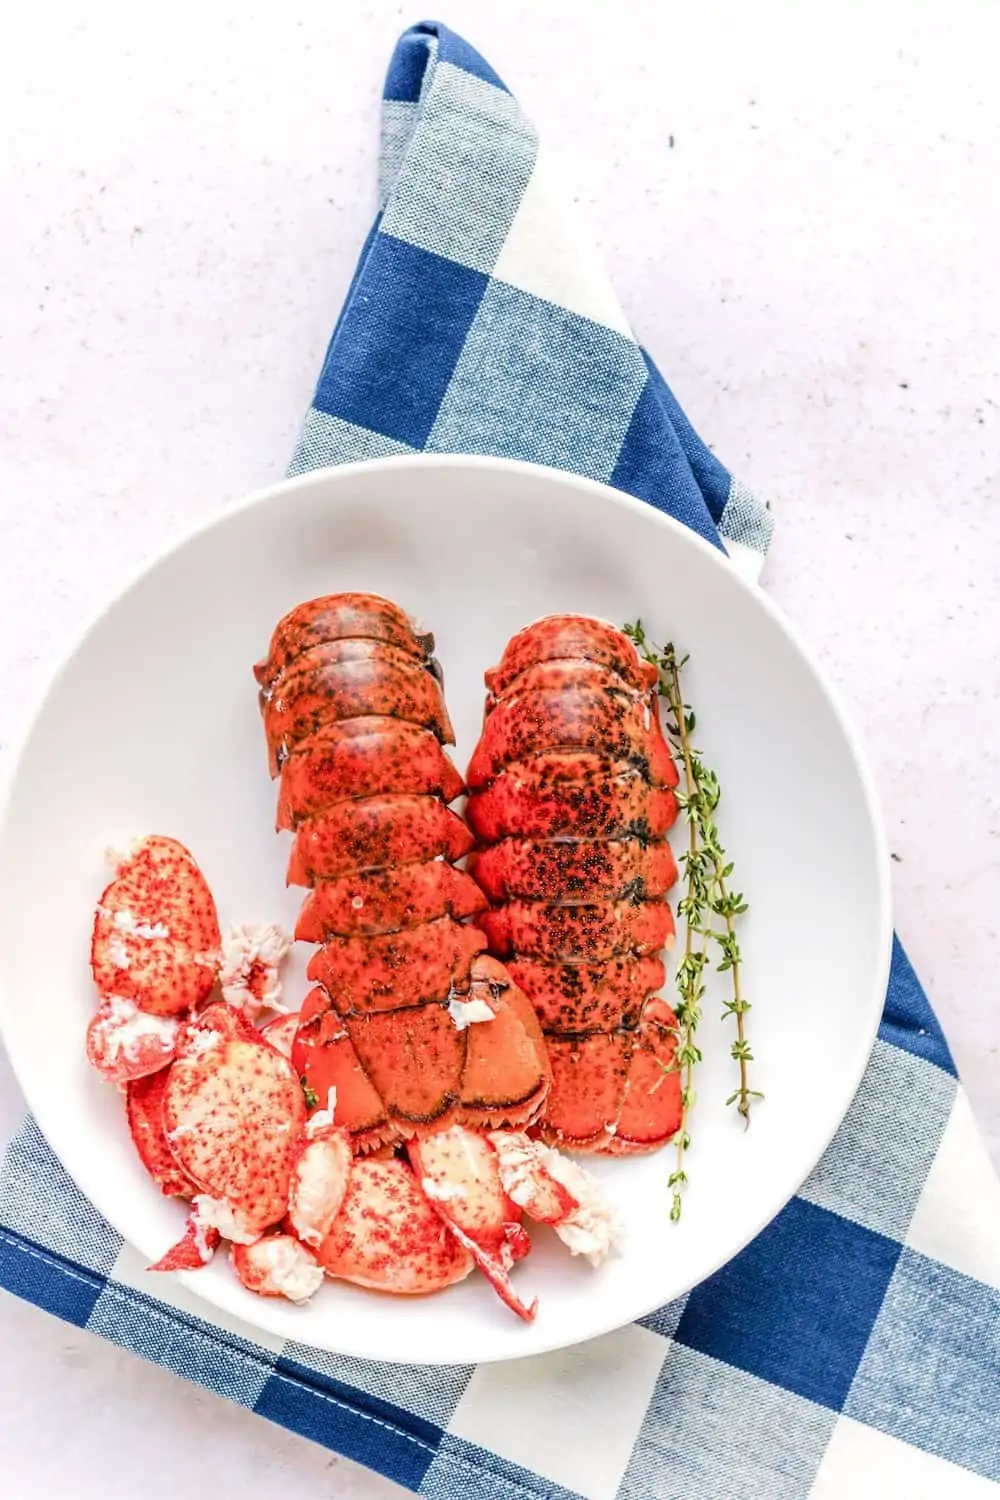 Cooked lobster tails and meat in a white bowl on a blue napkin.